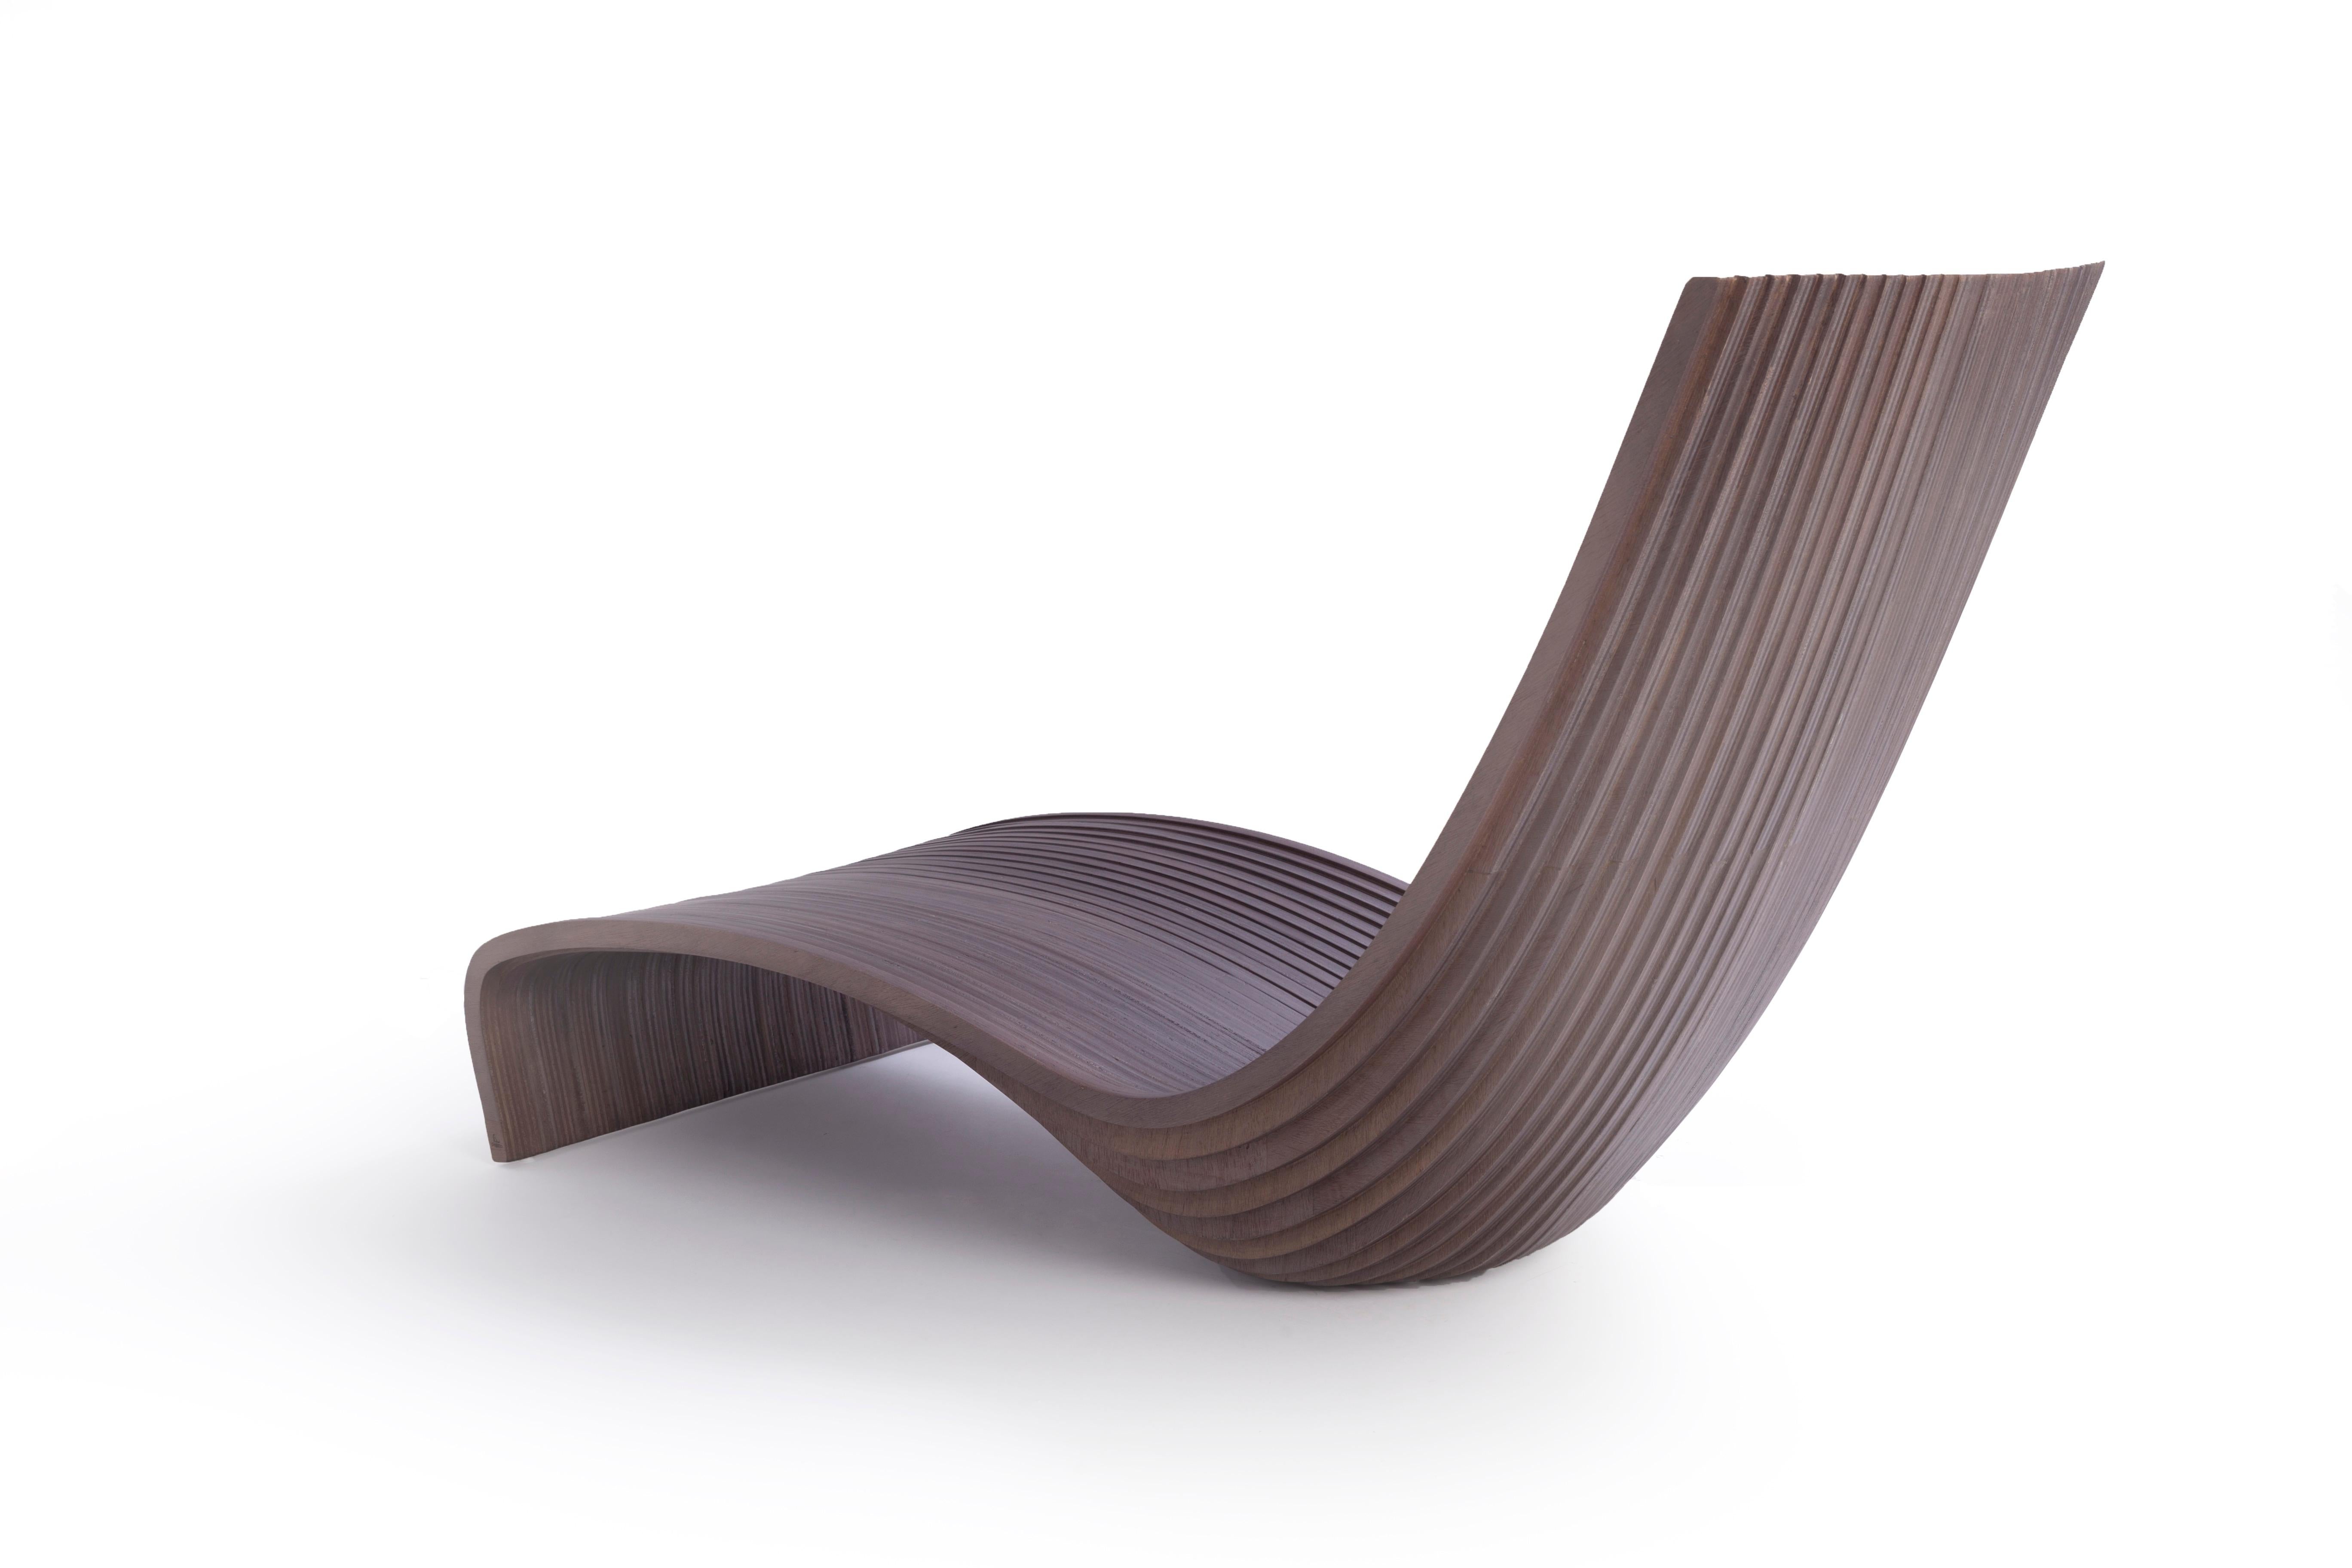 Guatemalan Lolo Chair by Piegatto, a Sculptural Contemporary Lounge Chair For Sale